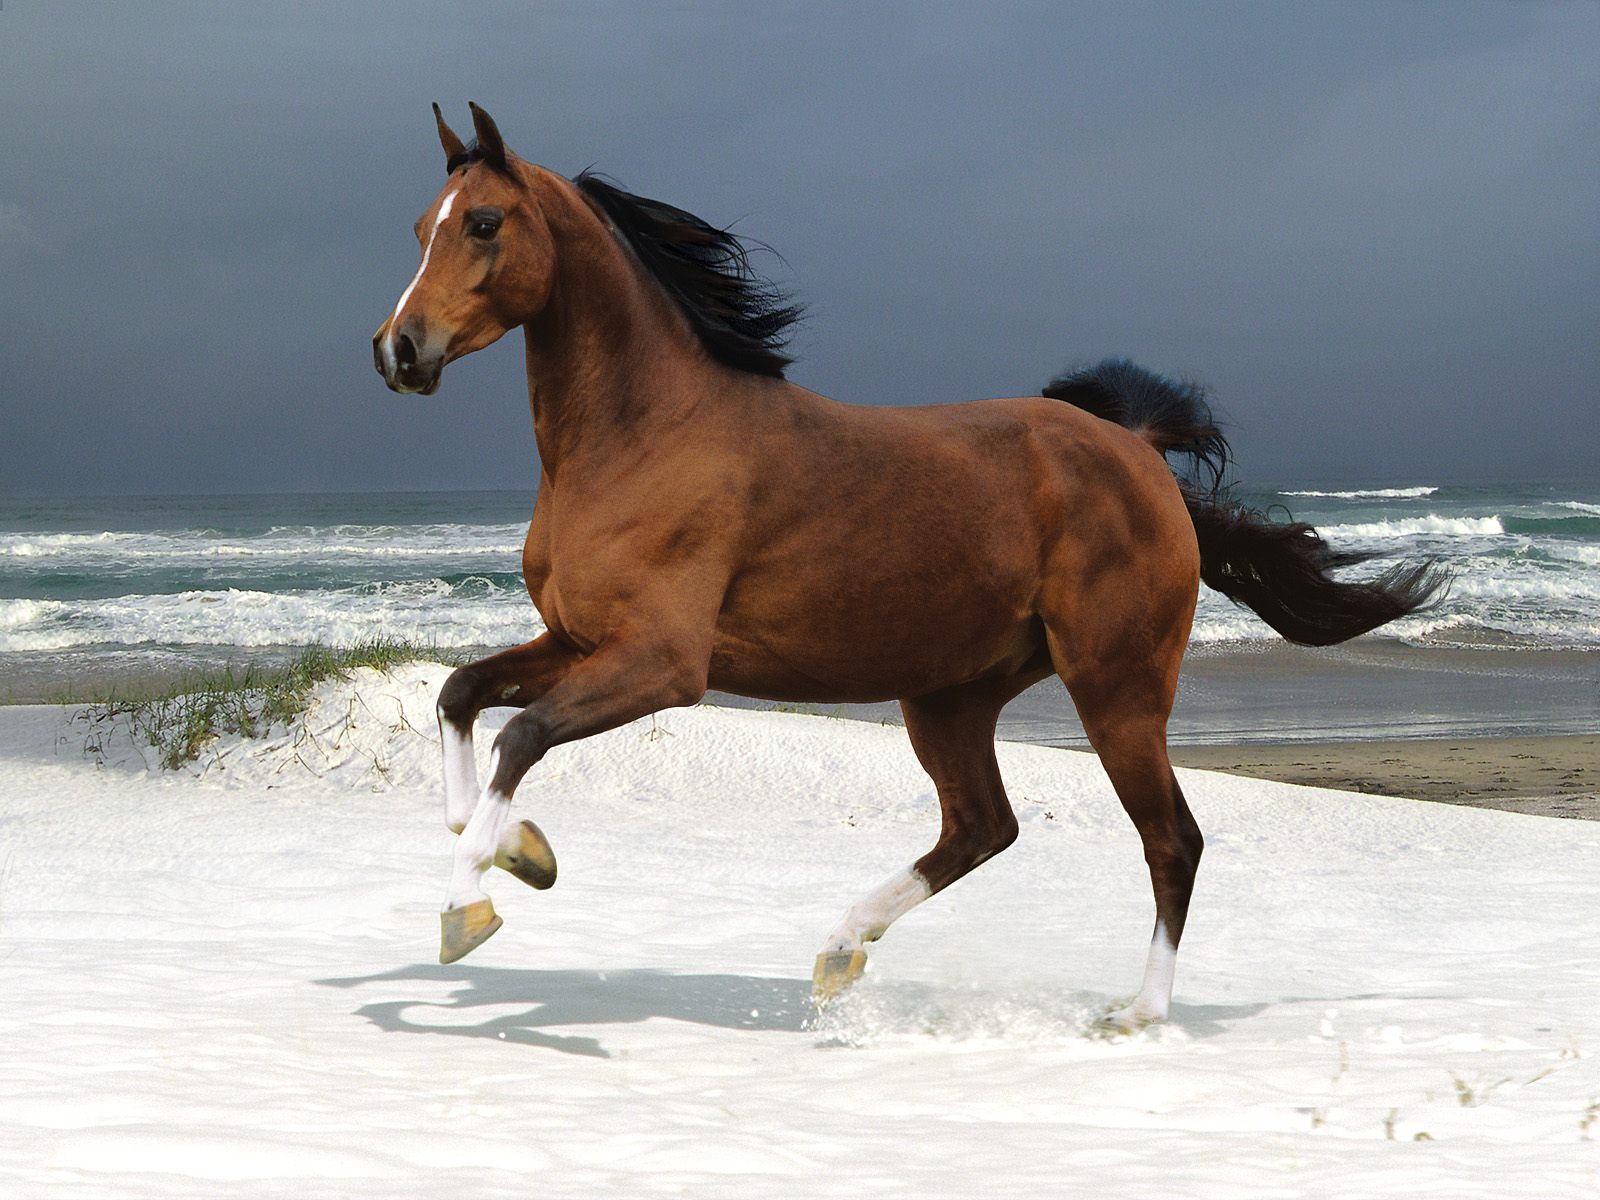 Wallpaper of a brown horse in gallop on the beach